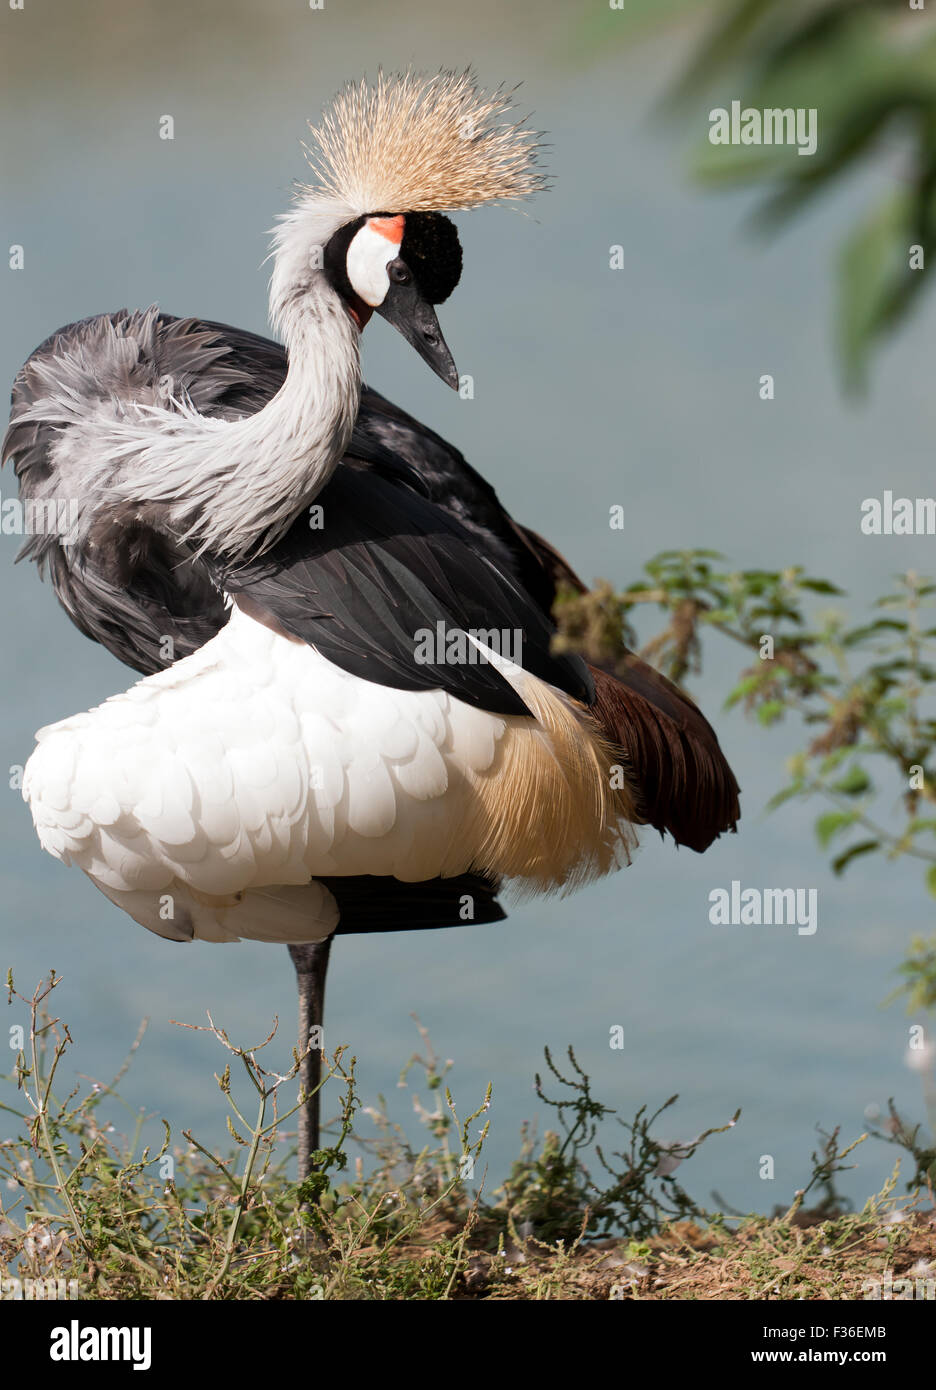 View of an East African Crested Crane (Balearica Regulorum Gibbericeps) at Wingham  Wildlife Park Stock Photo